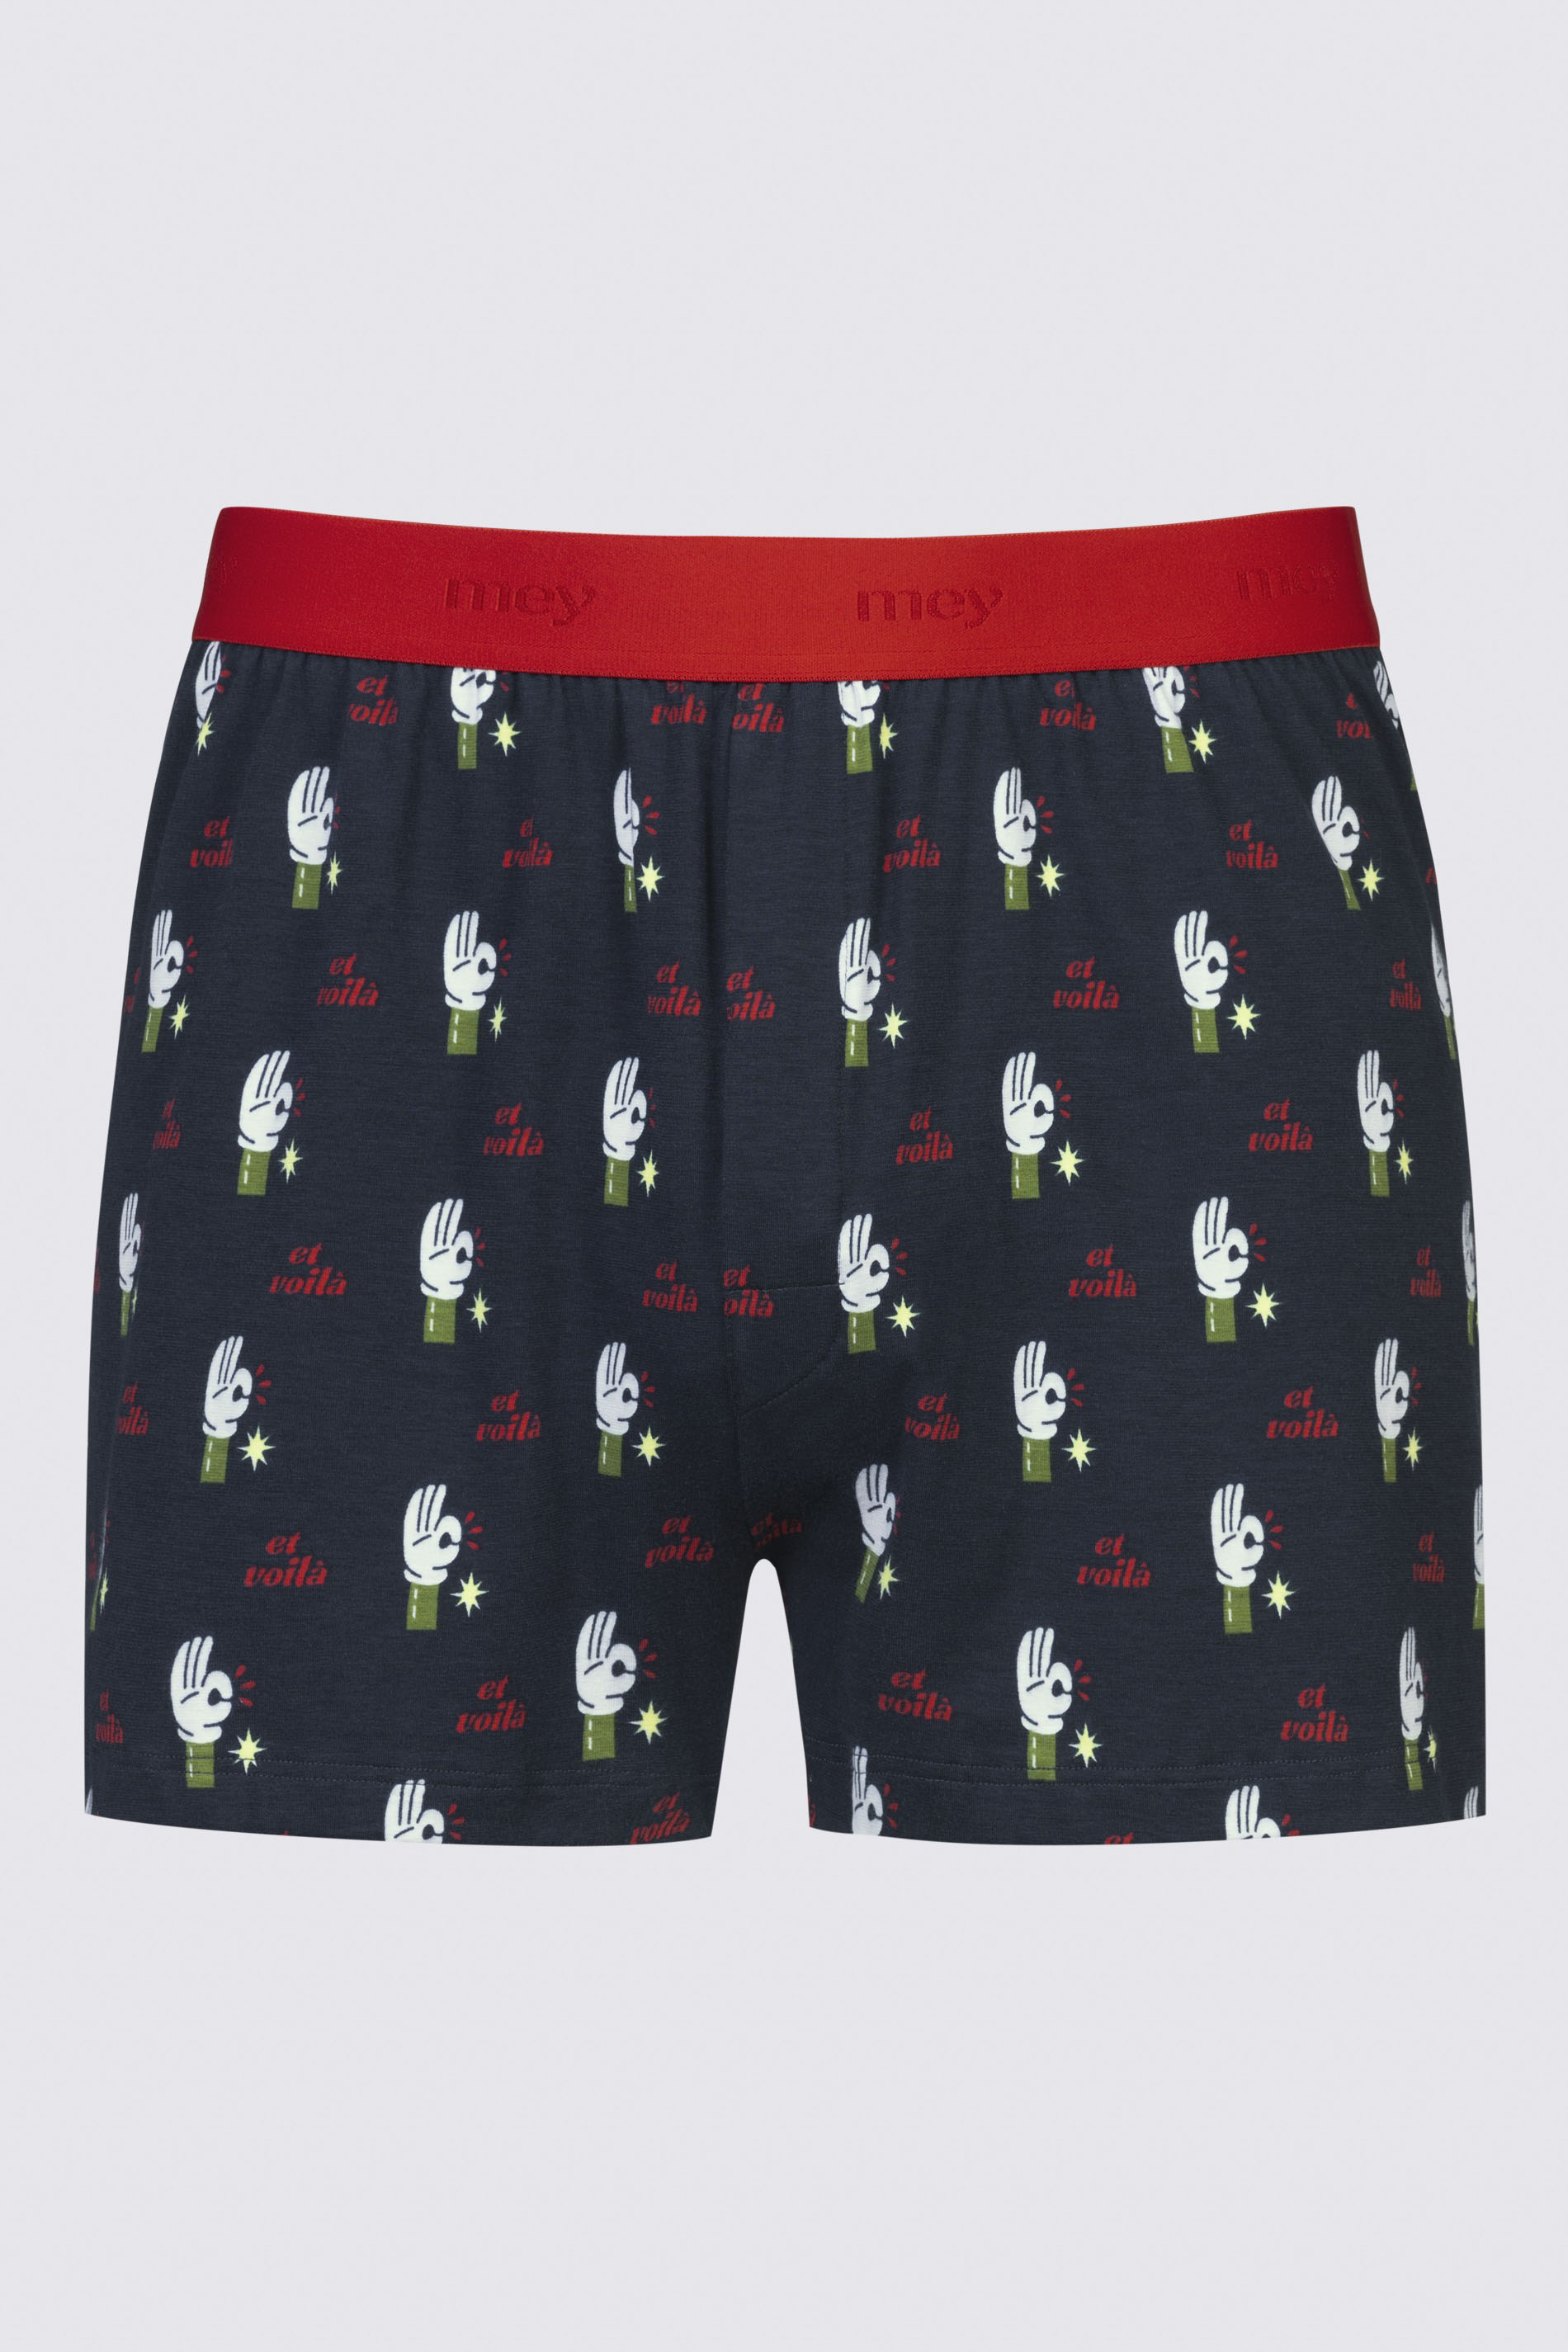 Boxershorts Serie RE:THINK OKAY Uitknippen | mey®